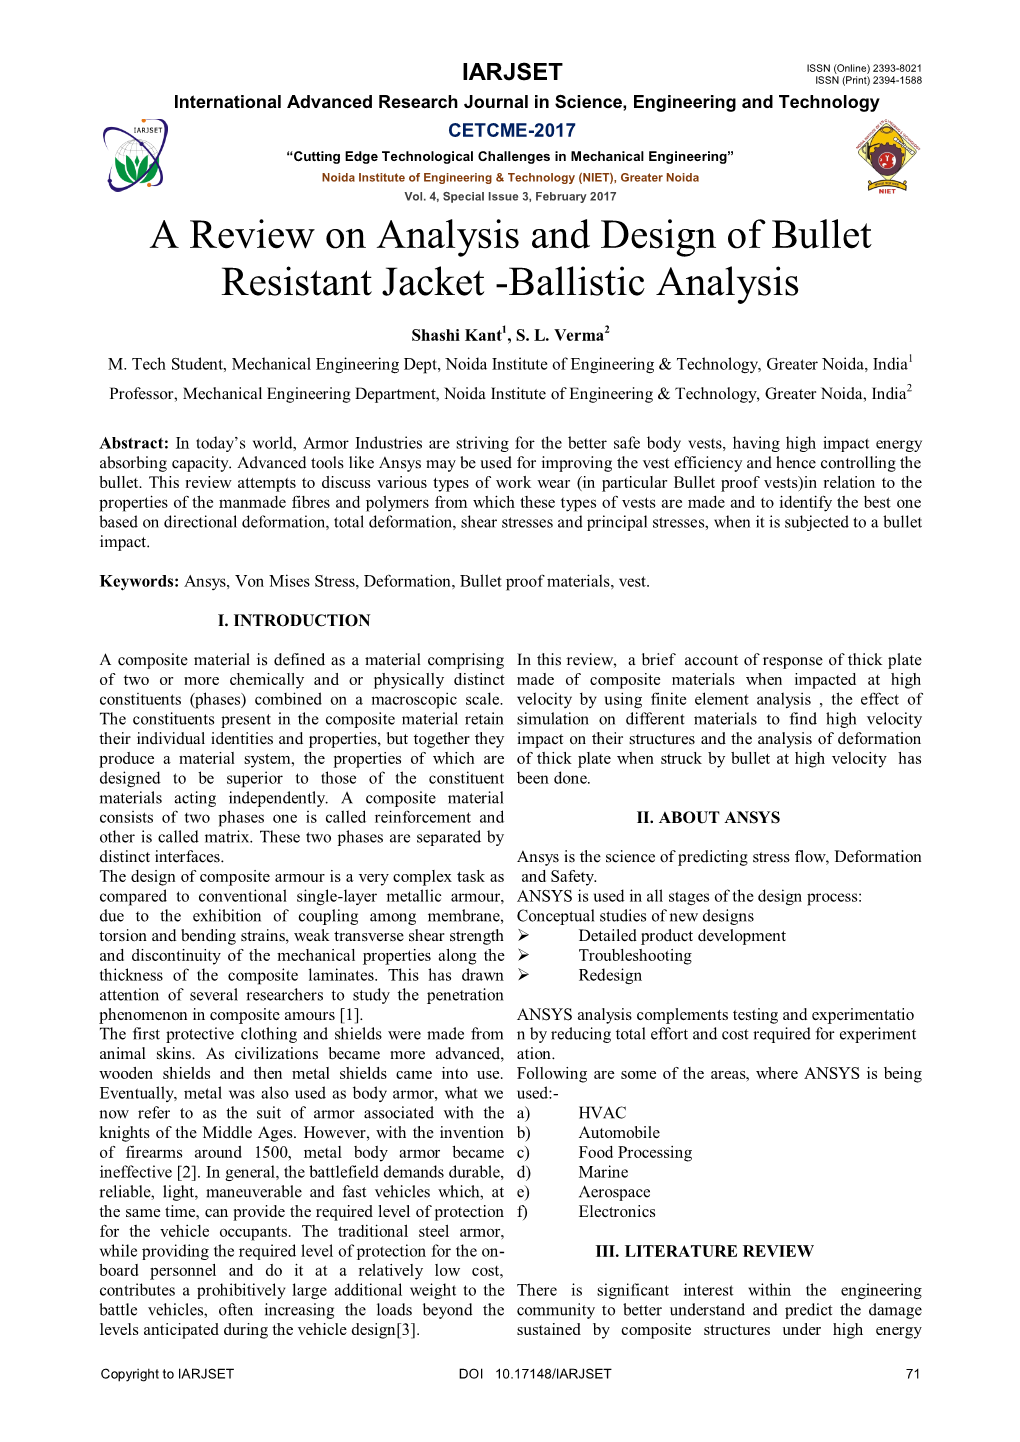 A Review on Analysis and Design of Bullet Resistant Jacket -Ballistic Analysis